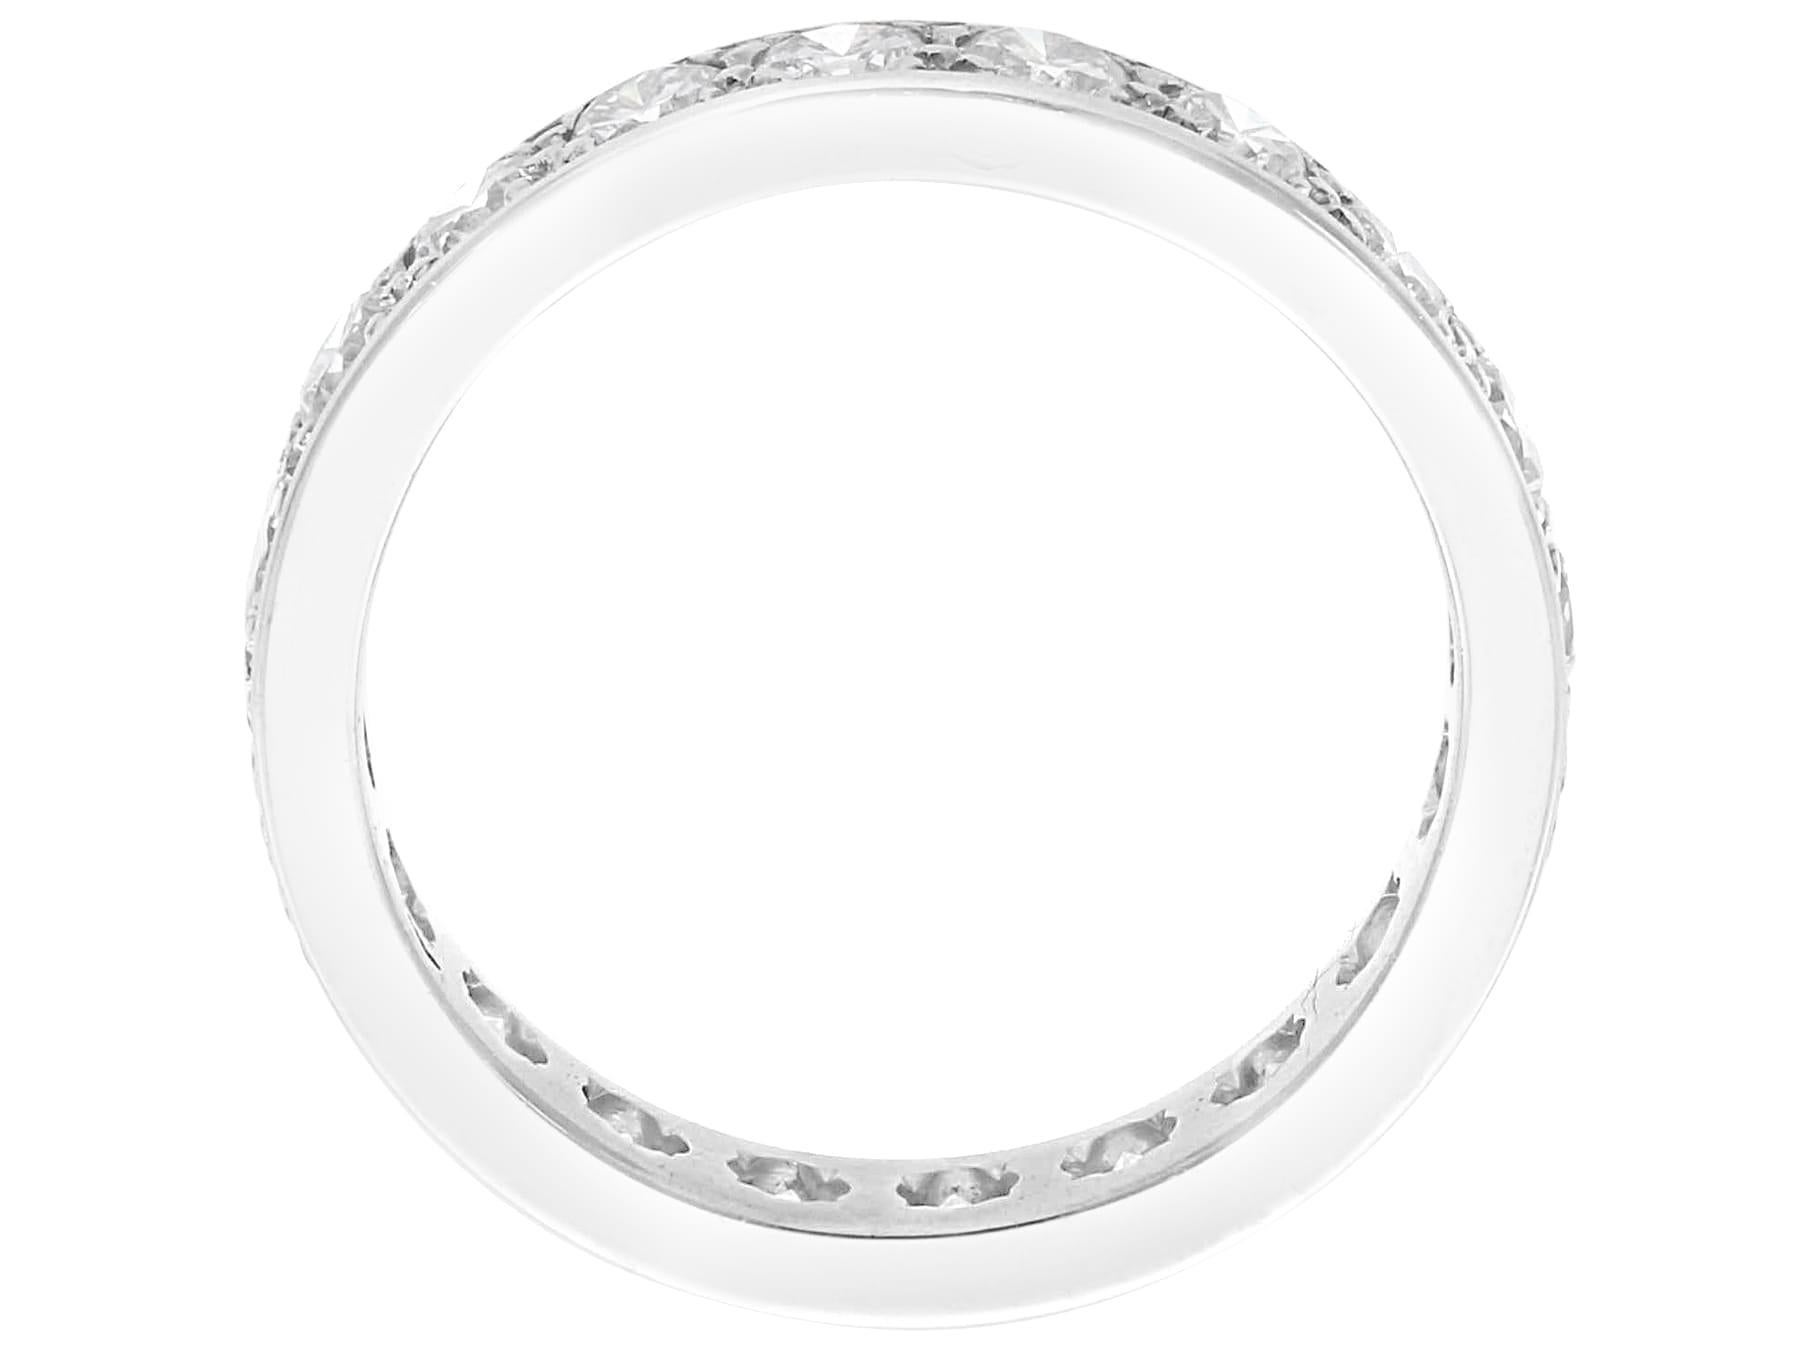 Antique 1.28Ct Diamond and 18k White Gold Full Eternity Ring Circa 1935 For Sale 1